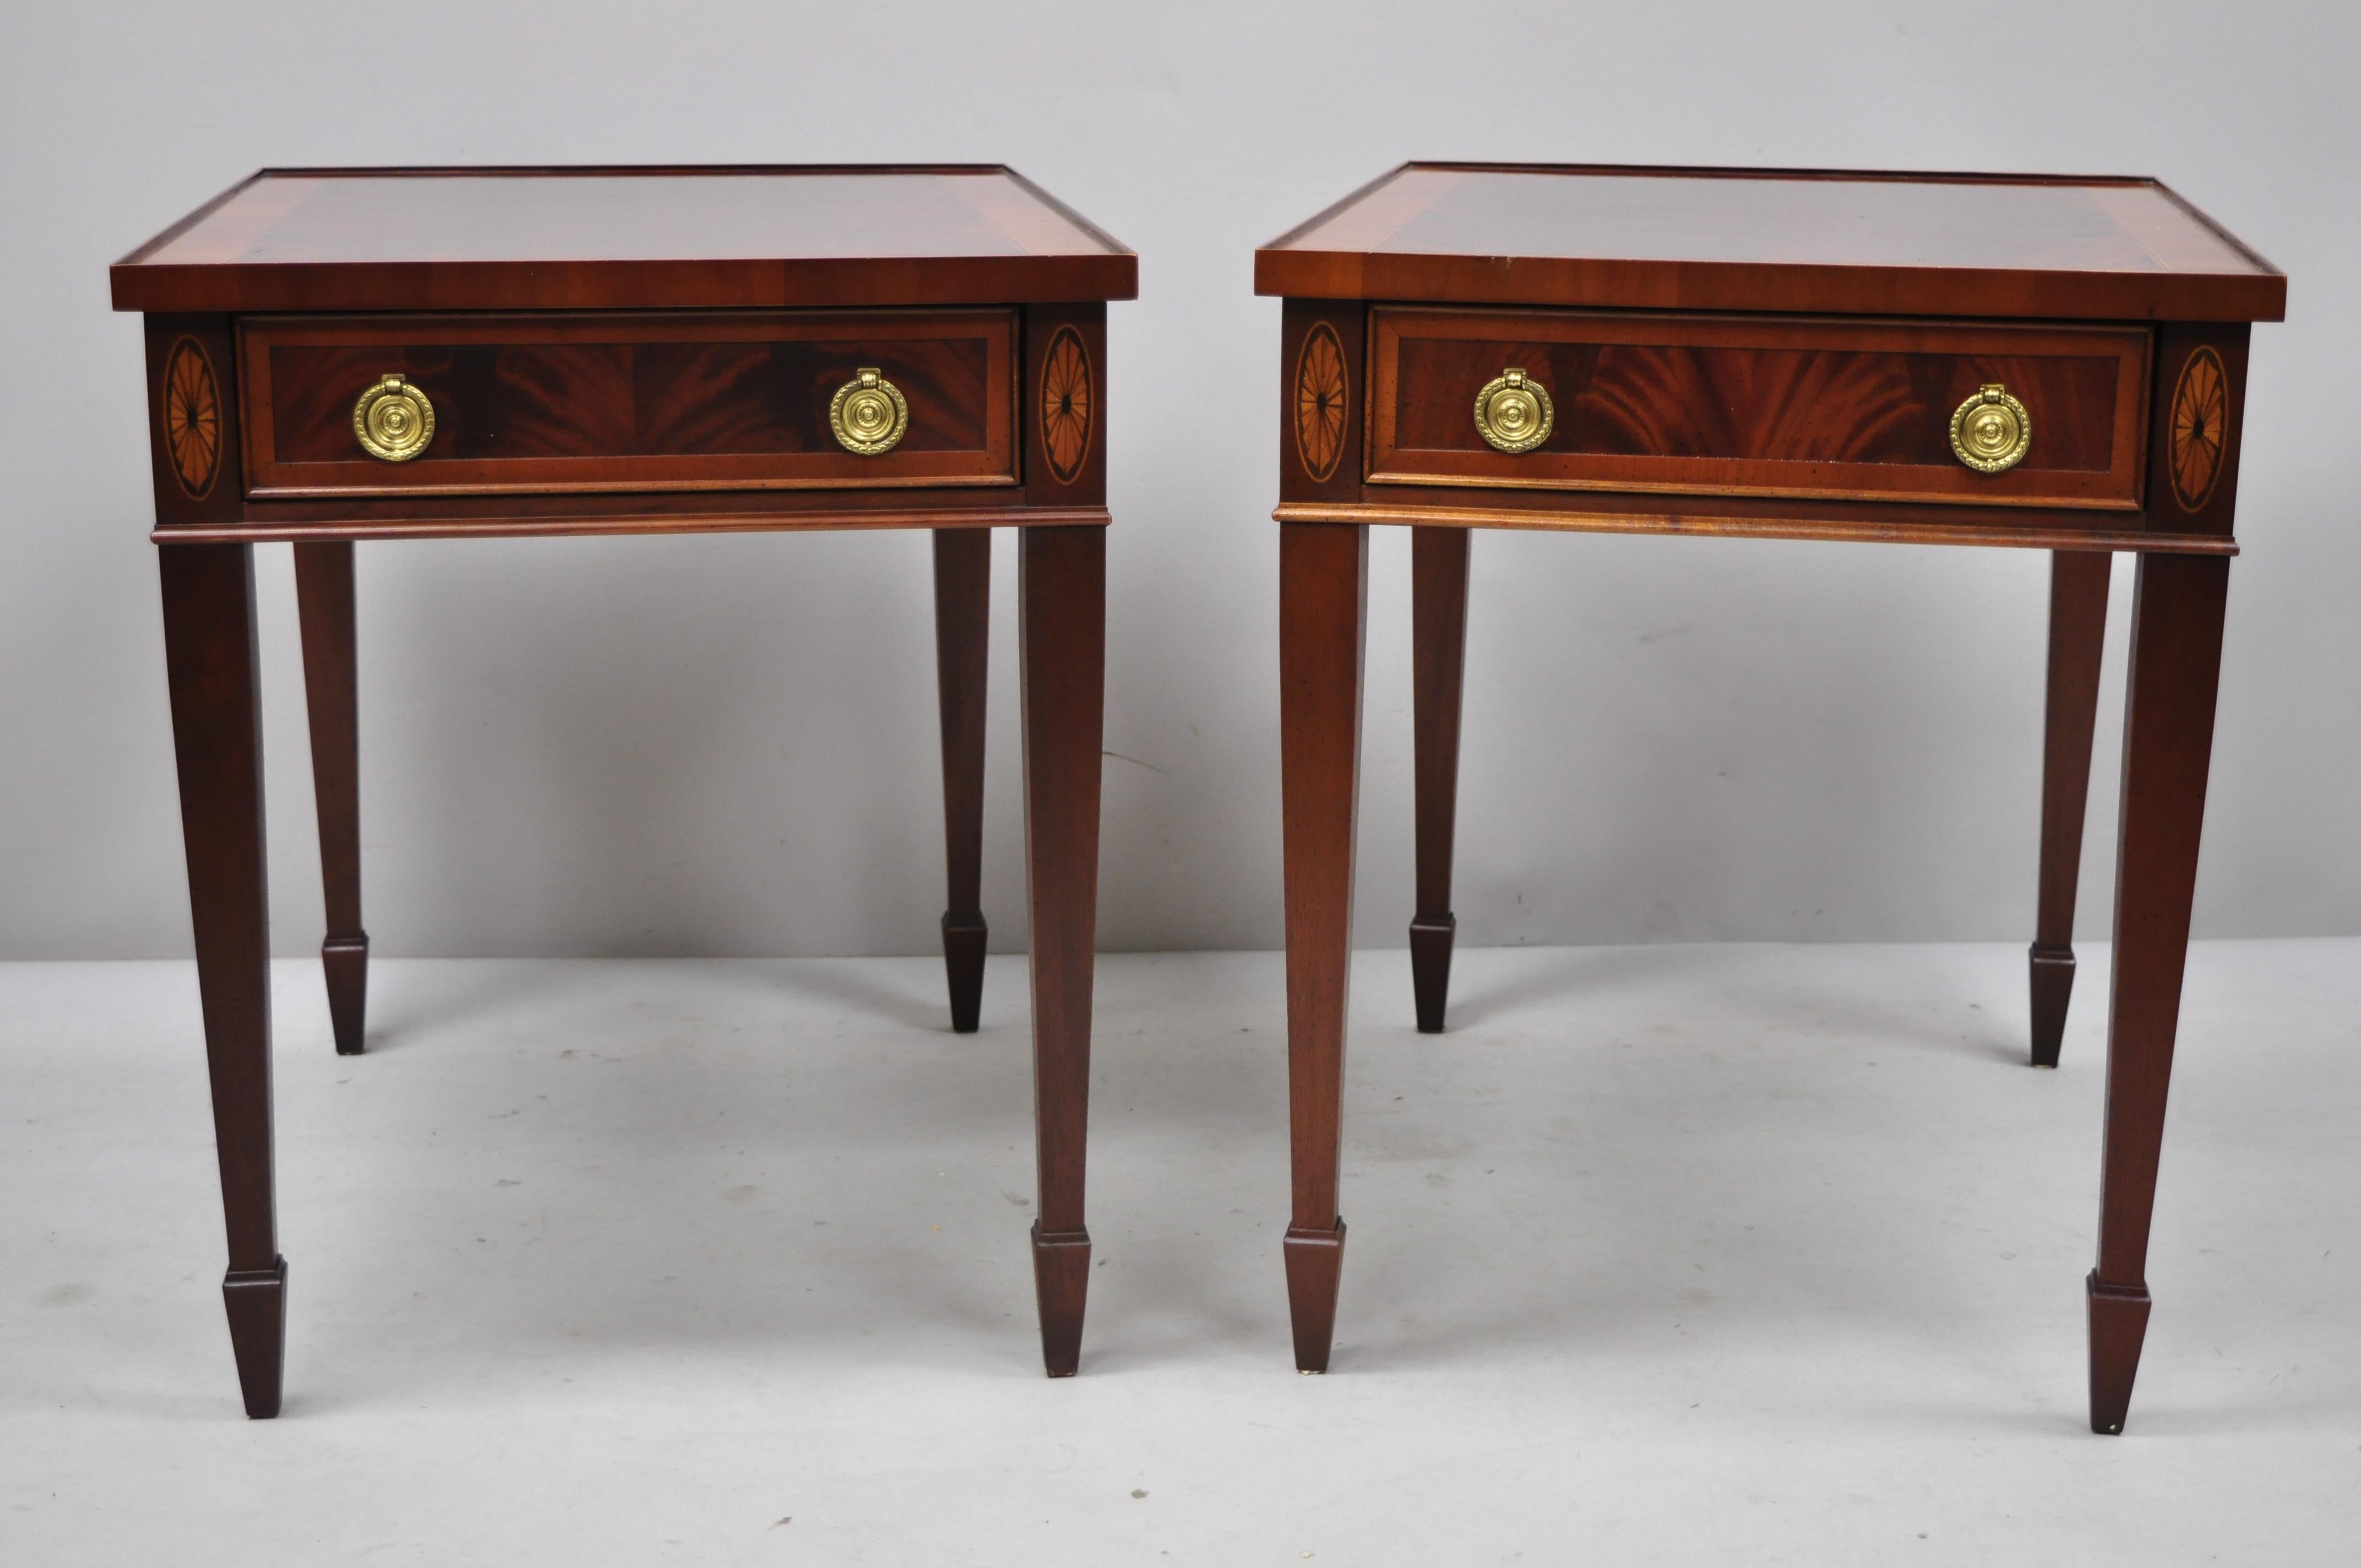 Pair of crotch flame mahogany Sheraton Federal style Hekman end tables. Listing includes beautiful wood grain, finished back, original label, 1 dovetailed drawer, tapered legs, nice inlay, quality American craftsmanship, circa mid-late 20th century.